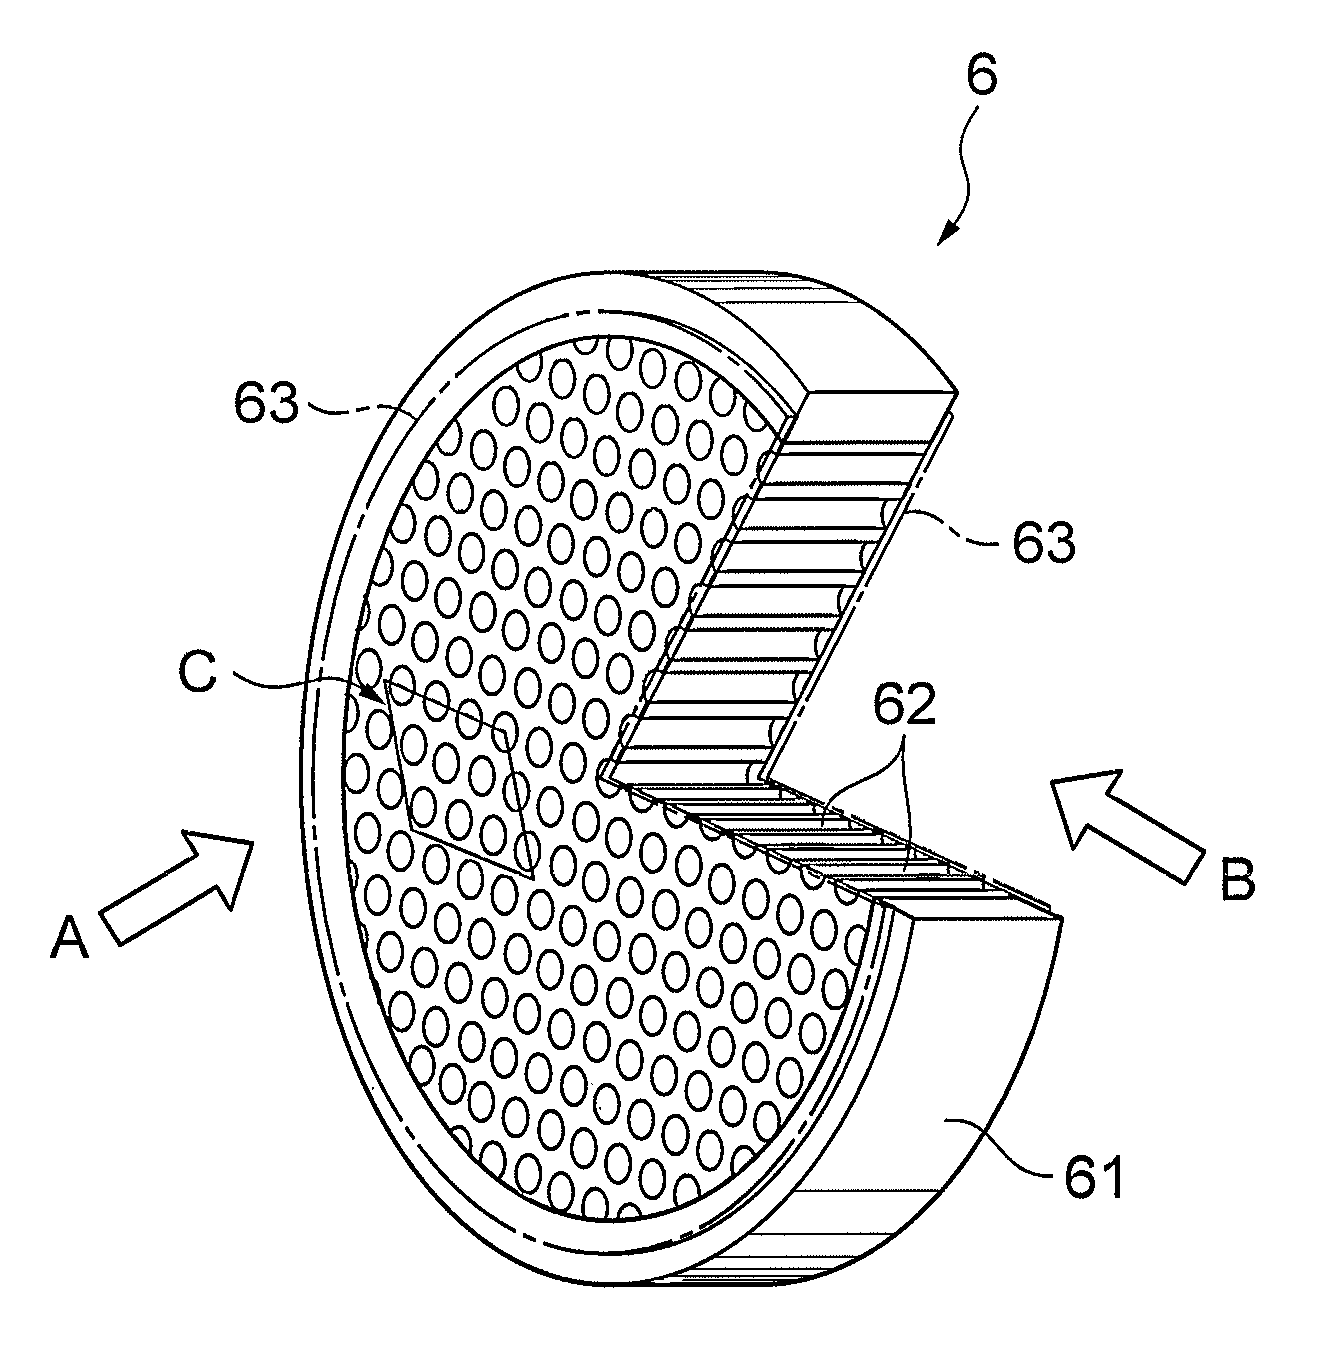 Microchannel plate having a main body, image intensifier, ion detector, and inspection device